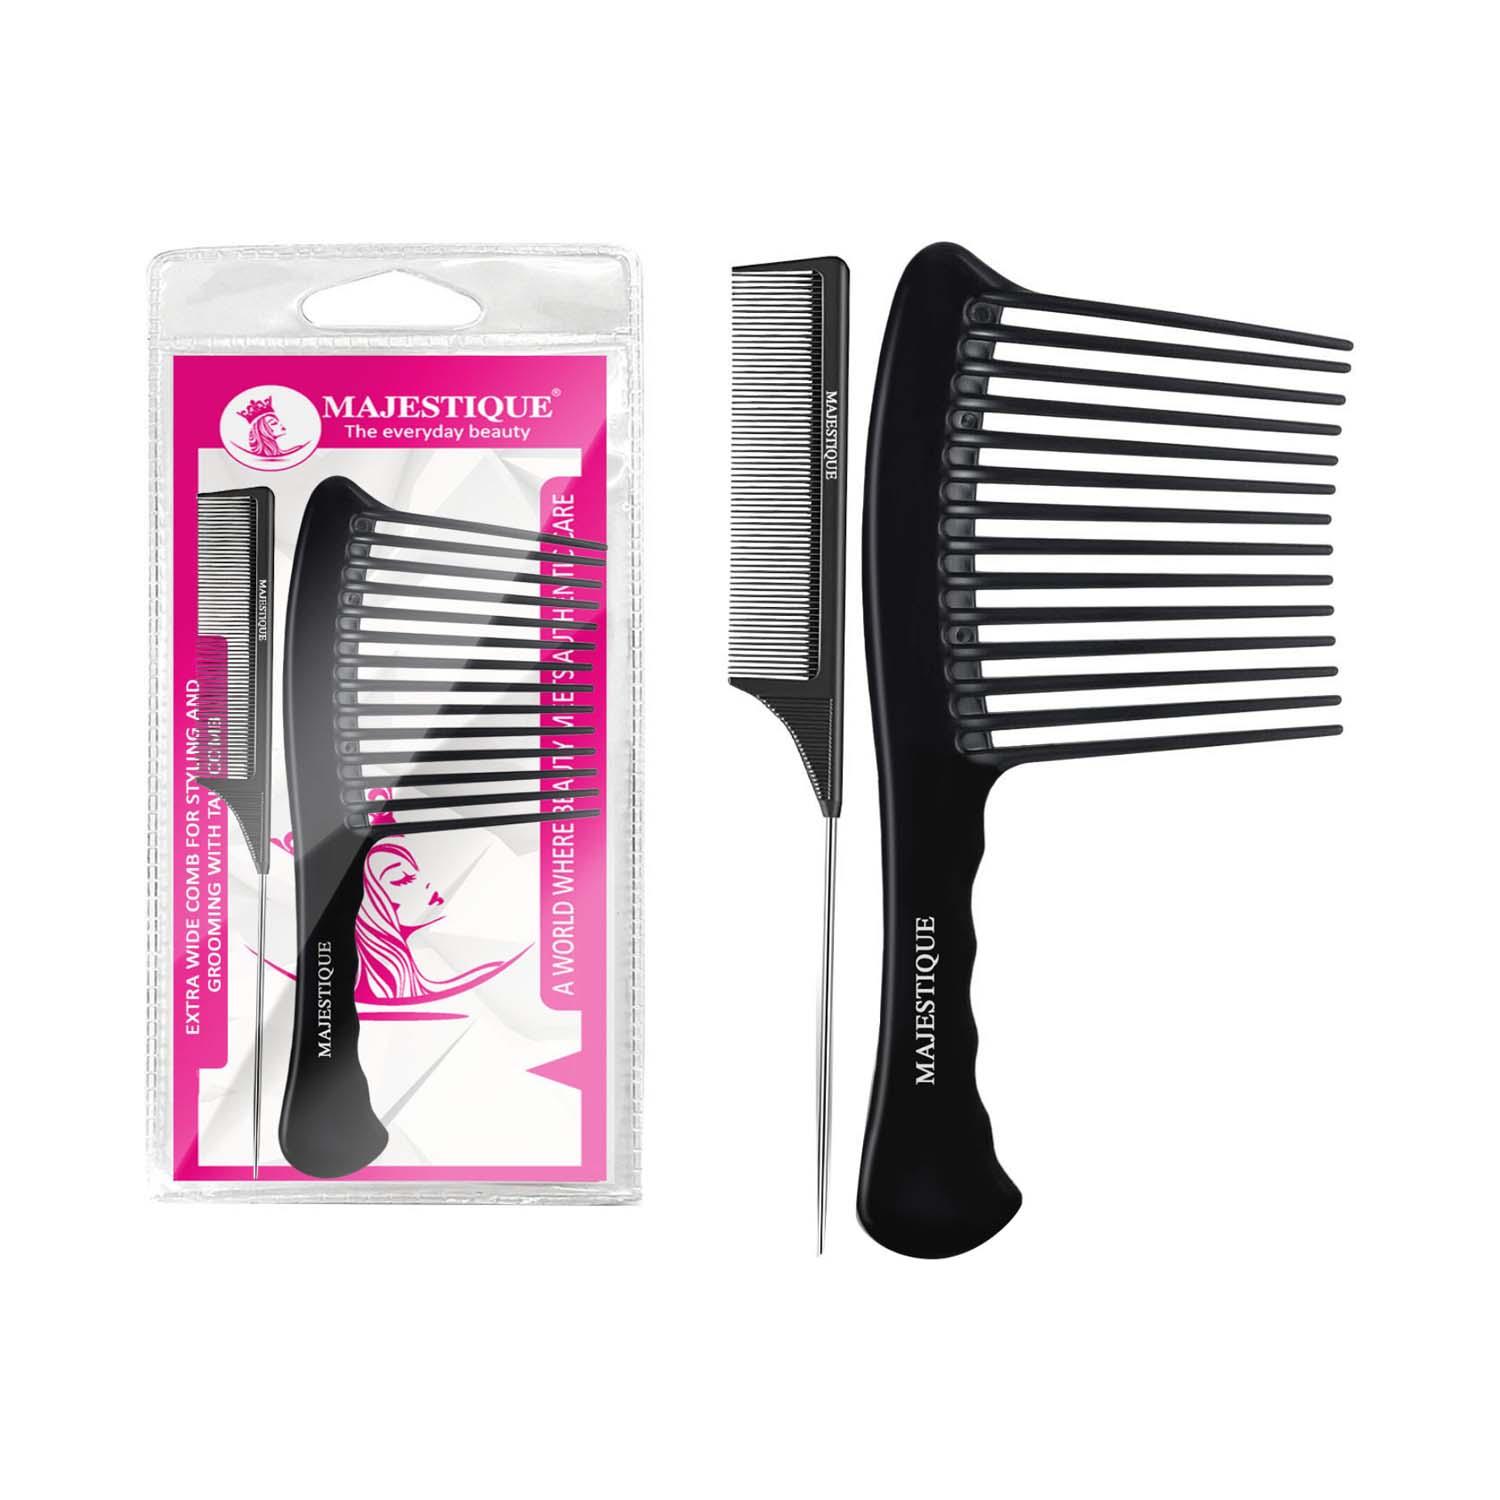 Majestique | Majestique Extra Wide Comb For Styling and Grooming (2 pcs)